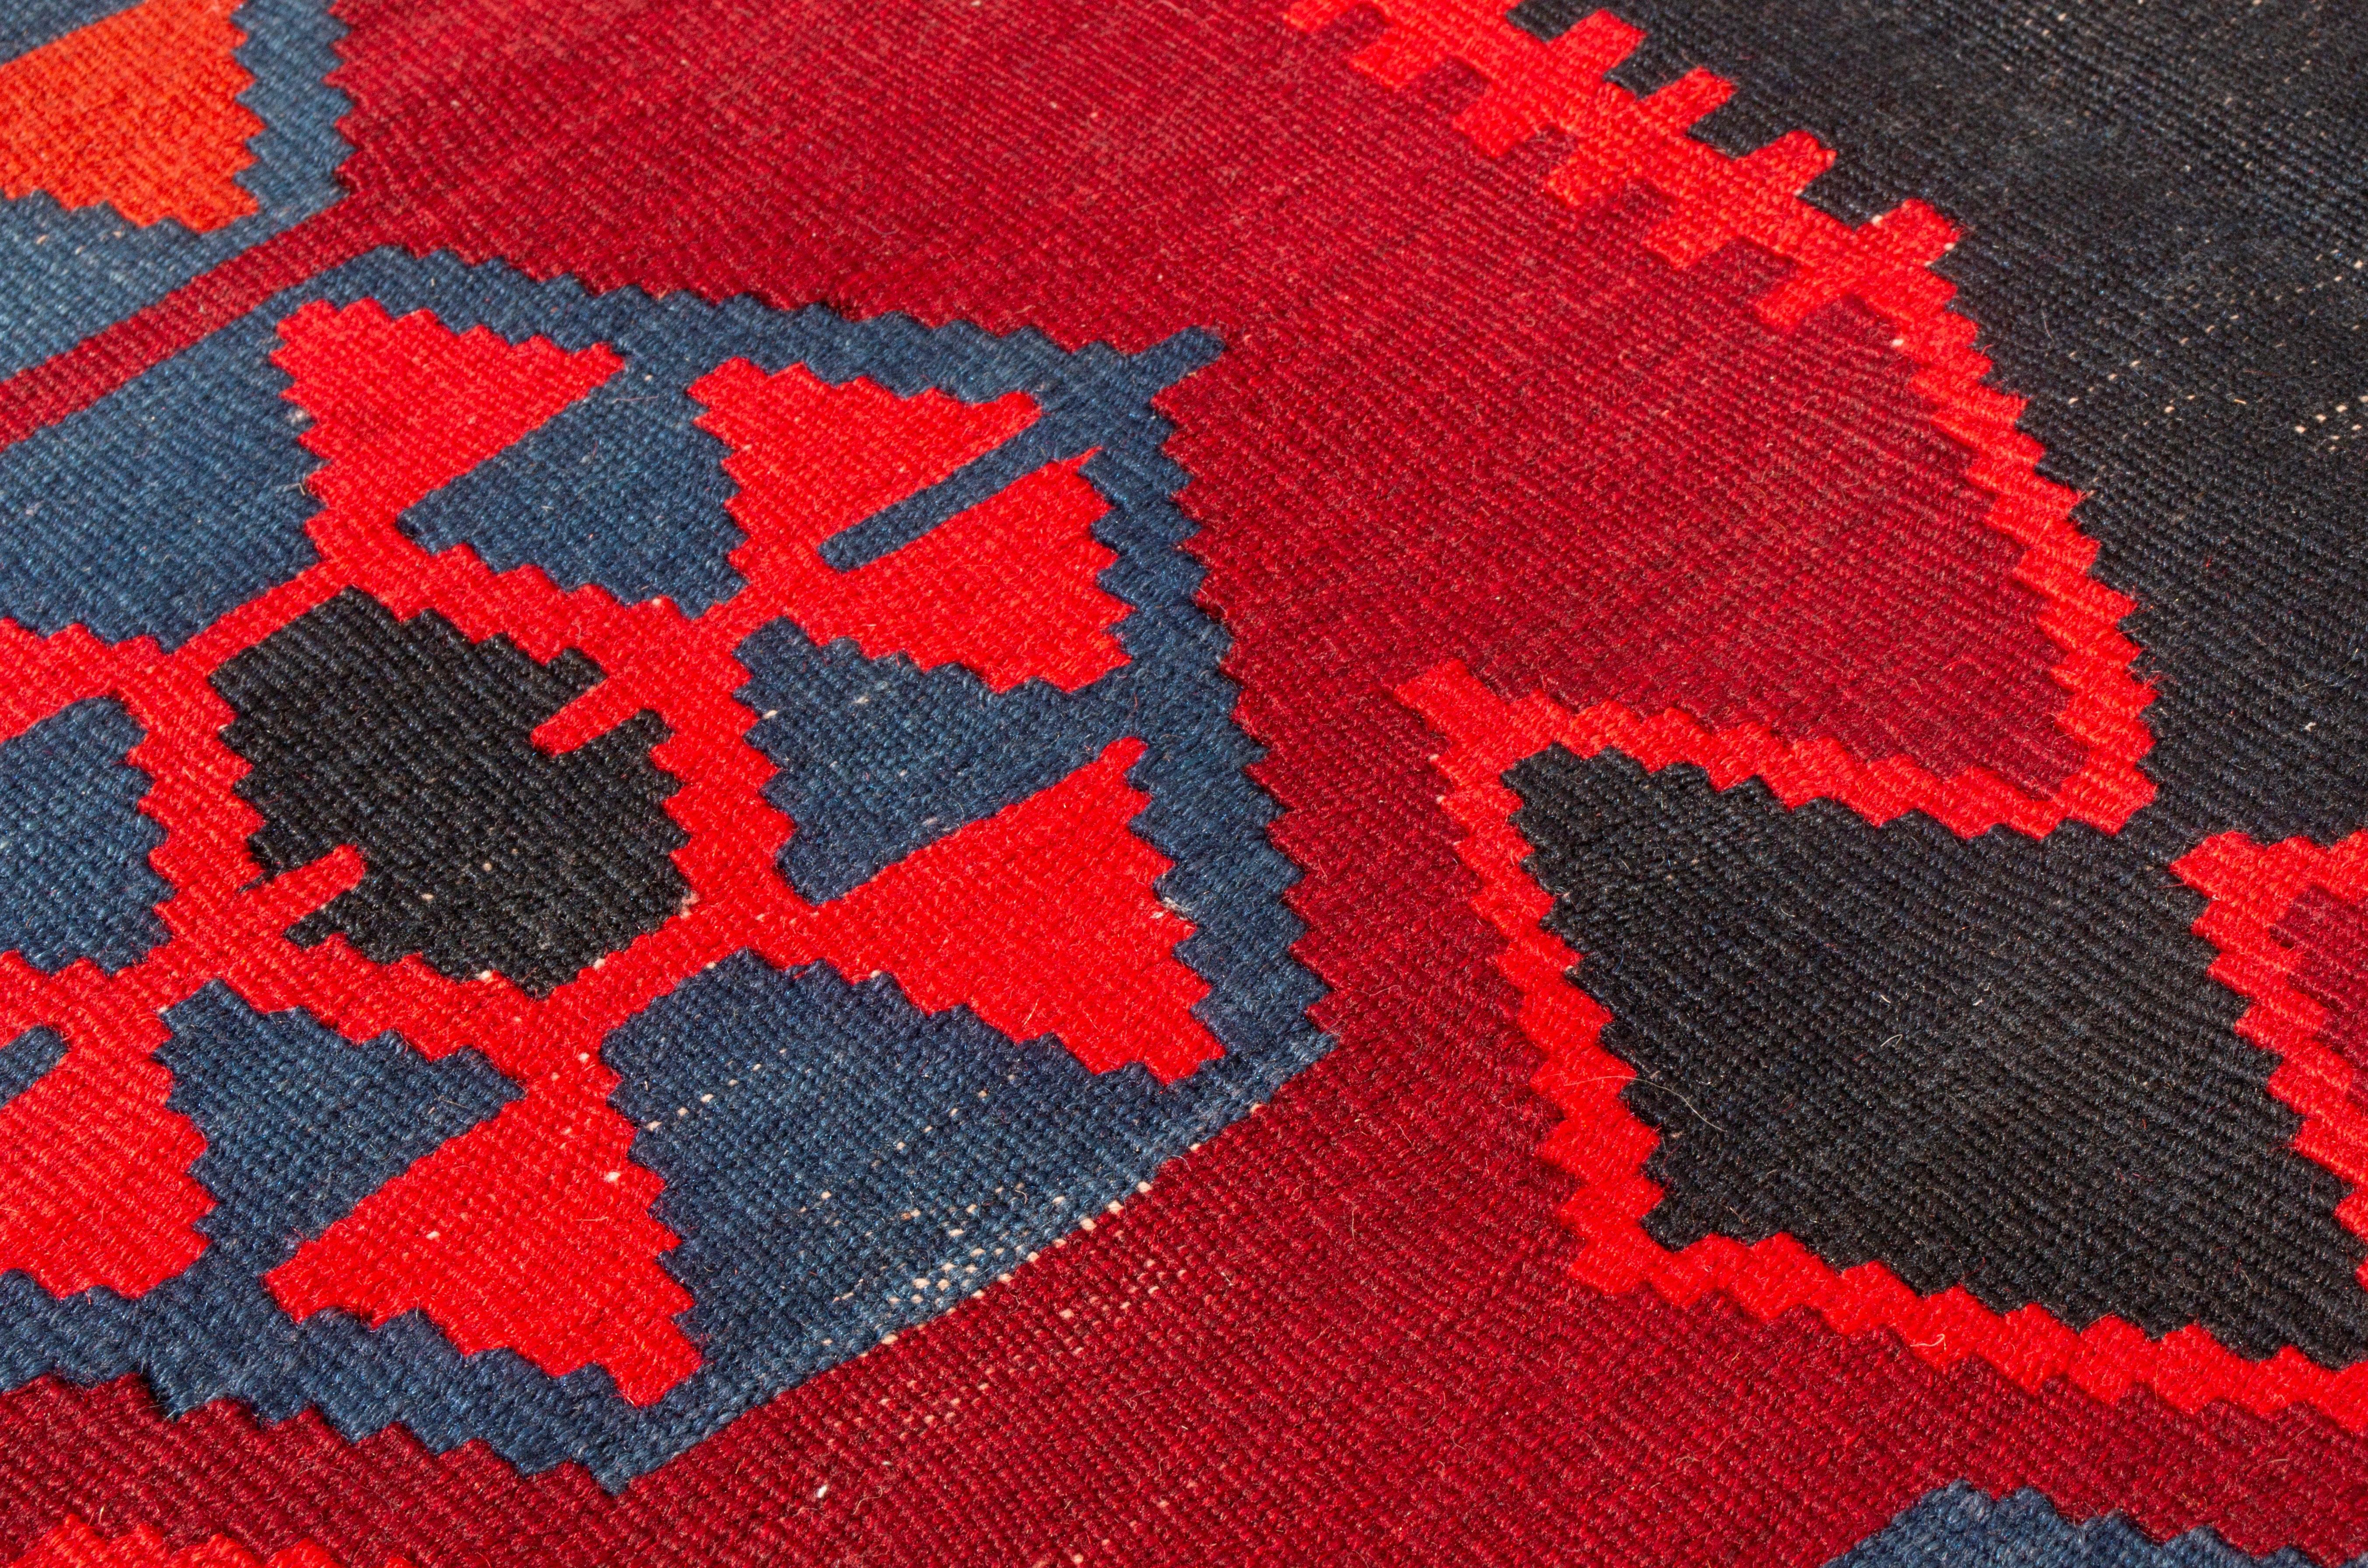 Antique Ghazvin Red and Blue Persian Wool Kilim Rug 1